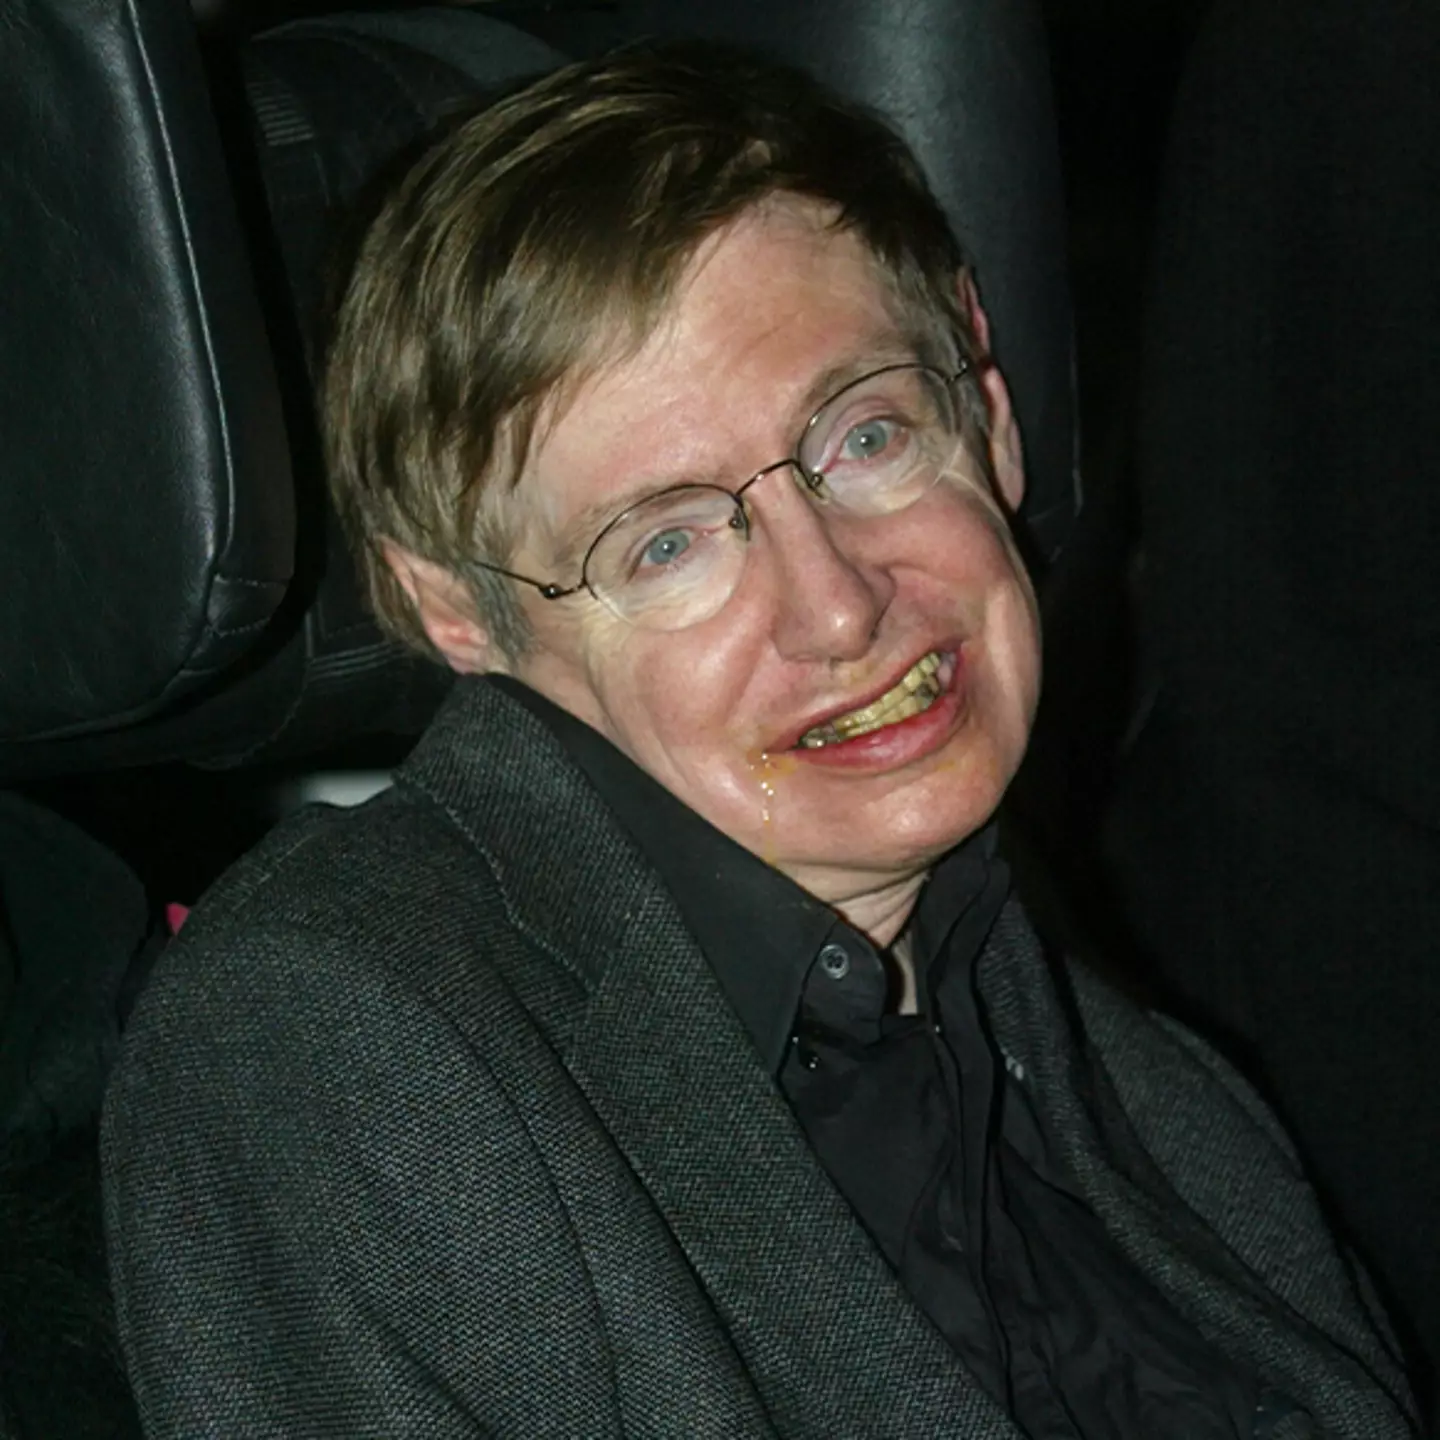 Stephen Hawking's simple answer when asked if he believed in God